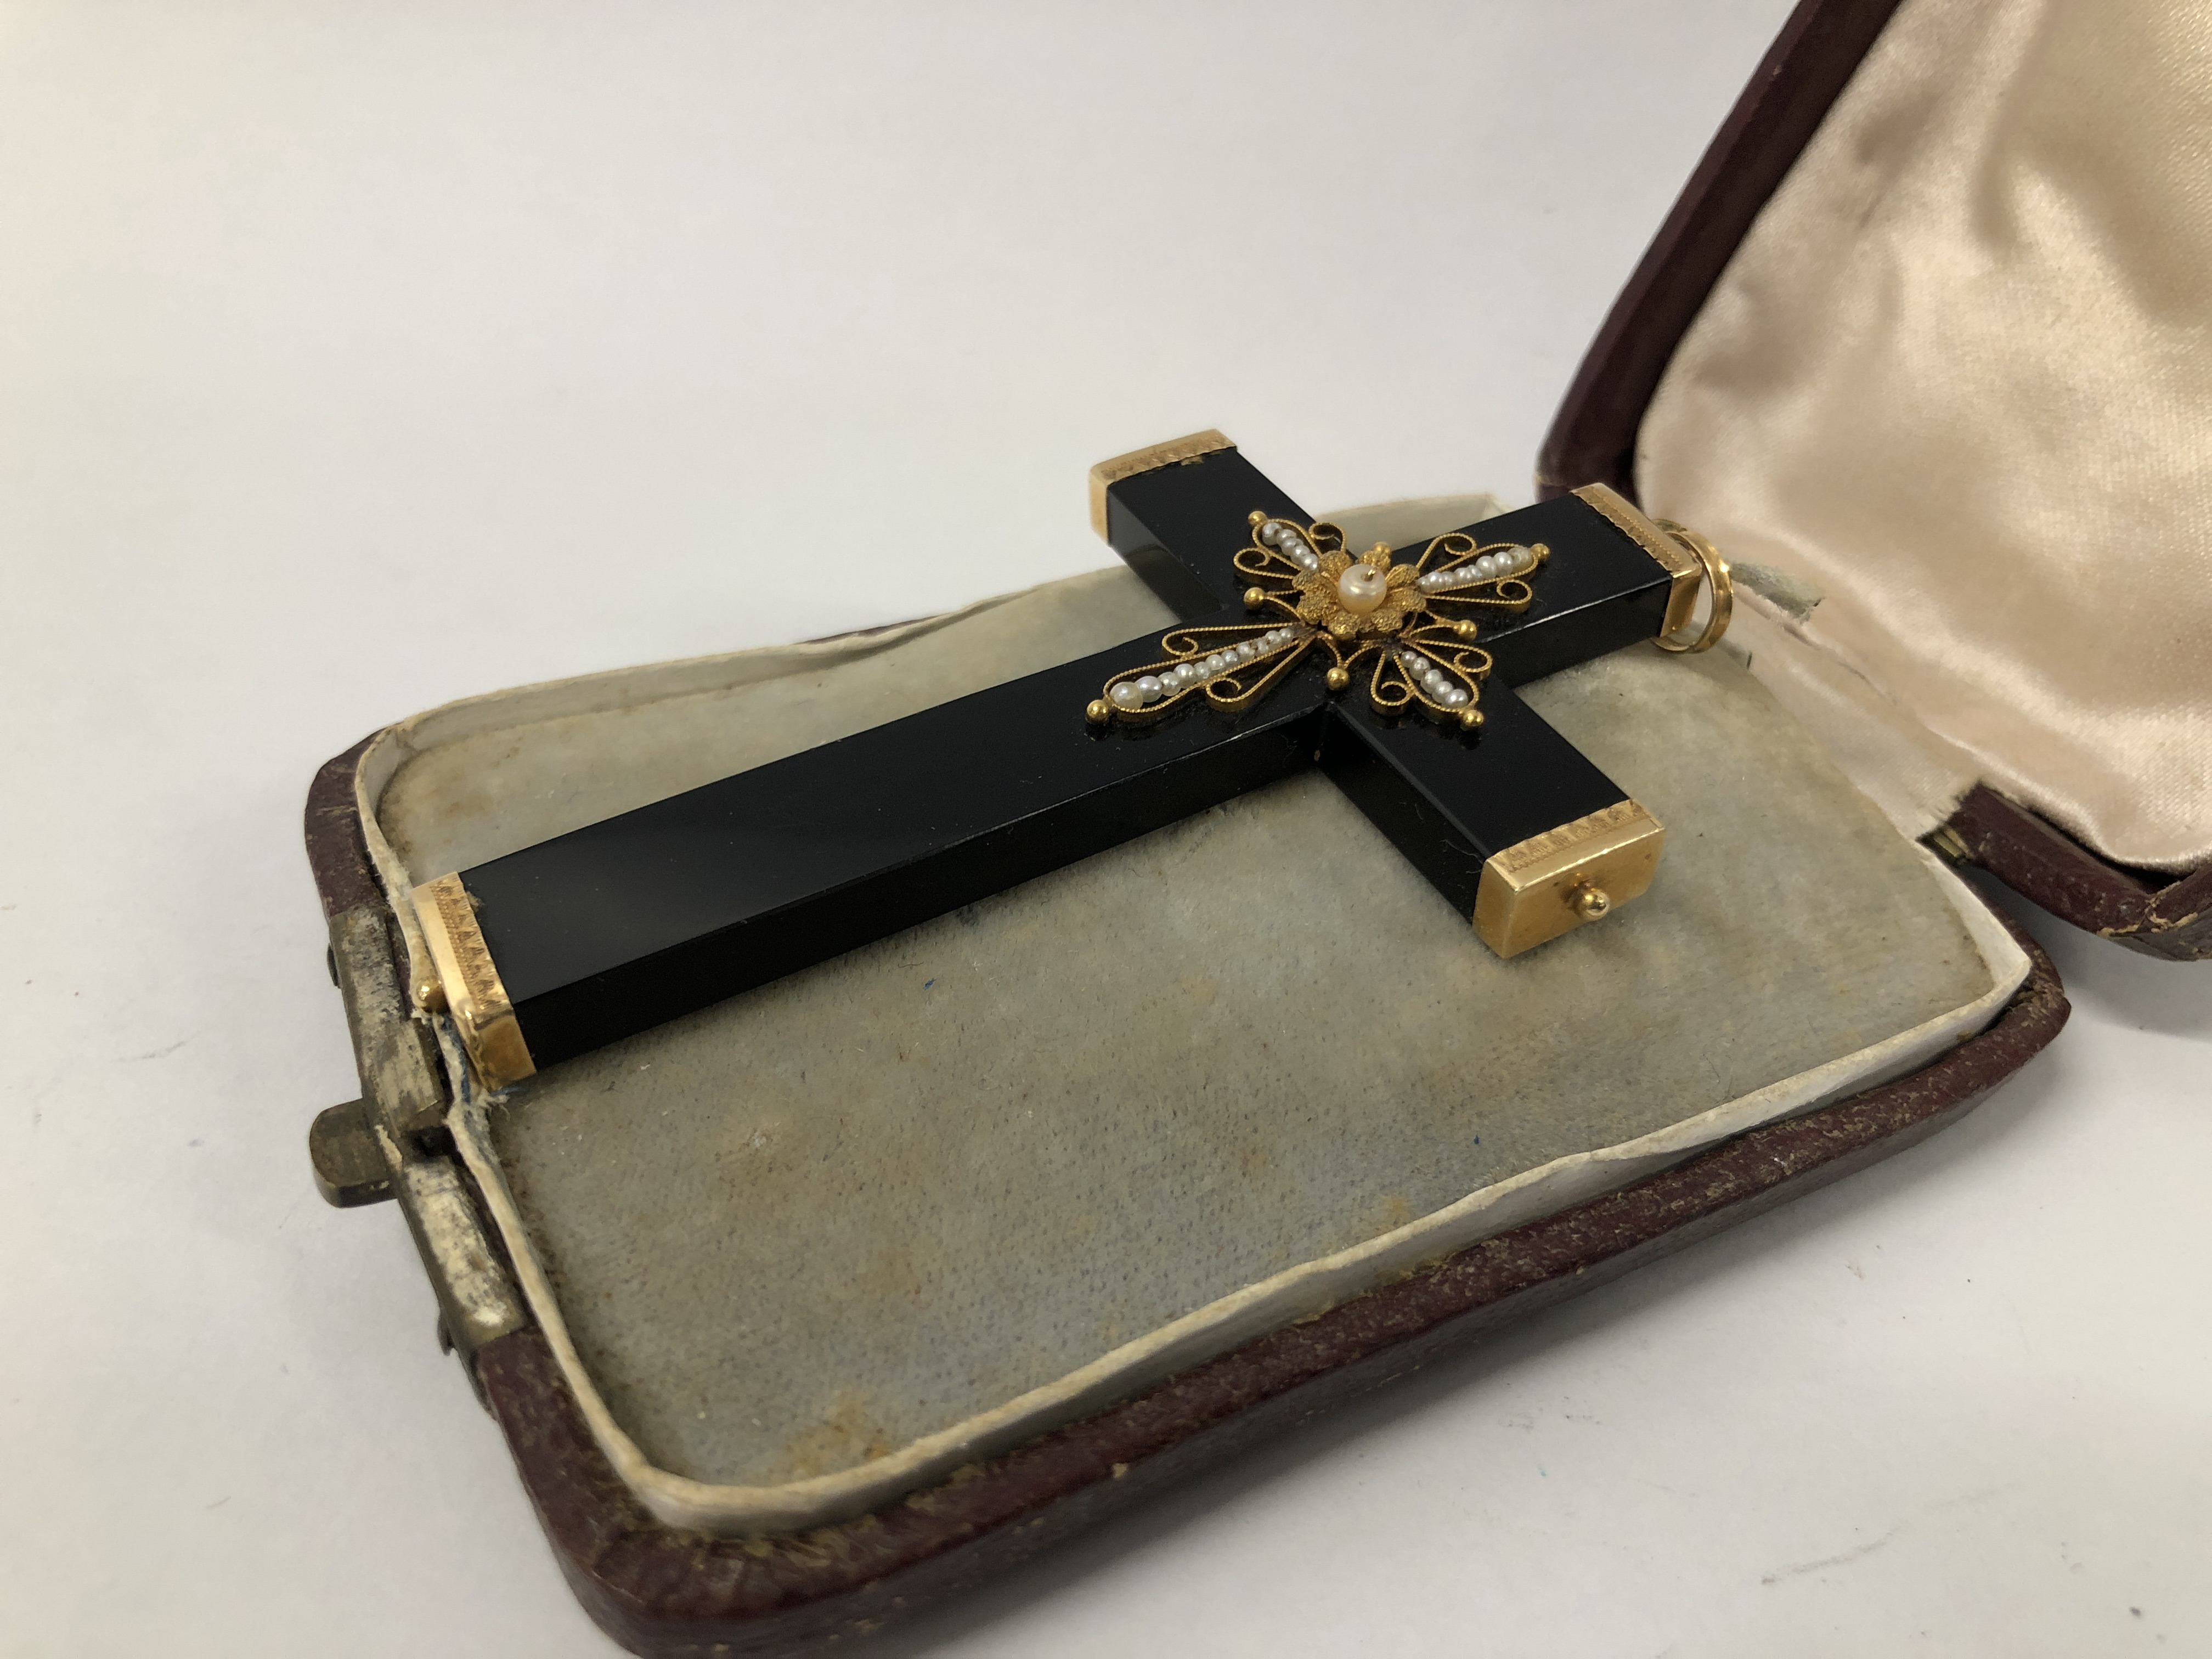 ANTIQUE MOURNING CROSS SET WITH SEED YELLOW METAL CAPPING AND DECORATION IN A VINTAGE BOX - Image 4 of 6